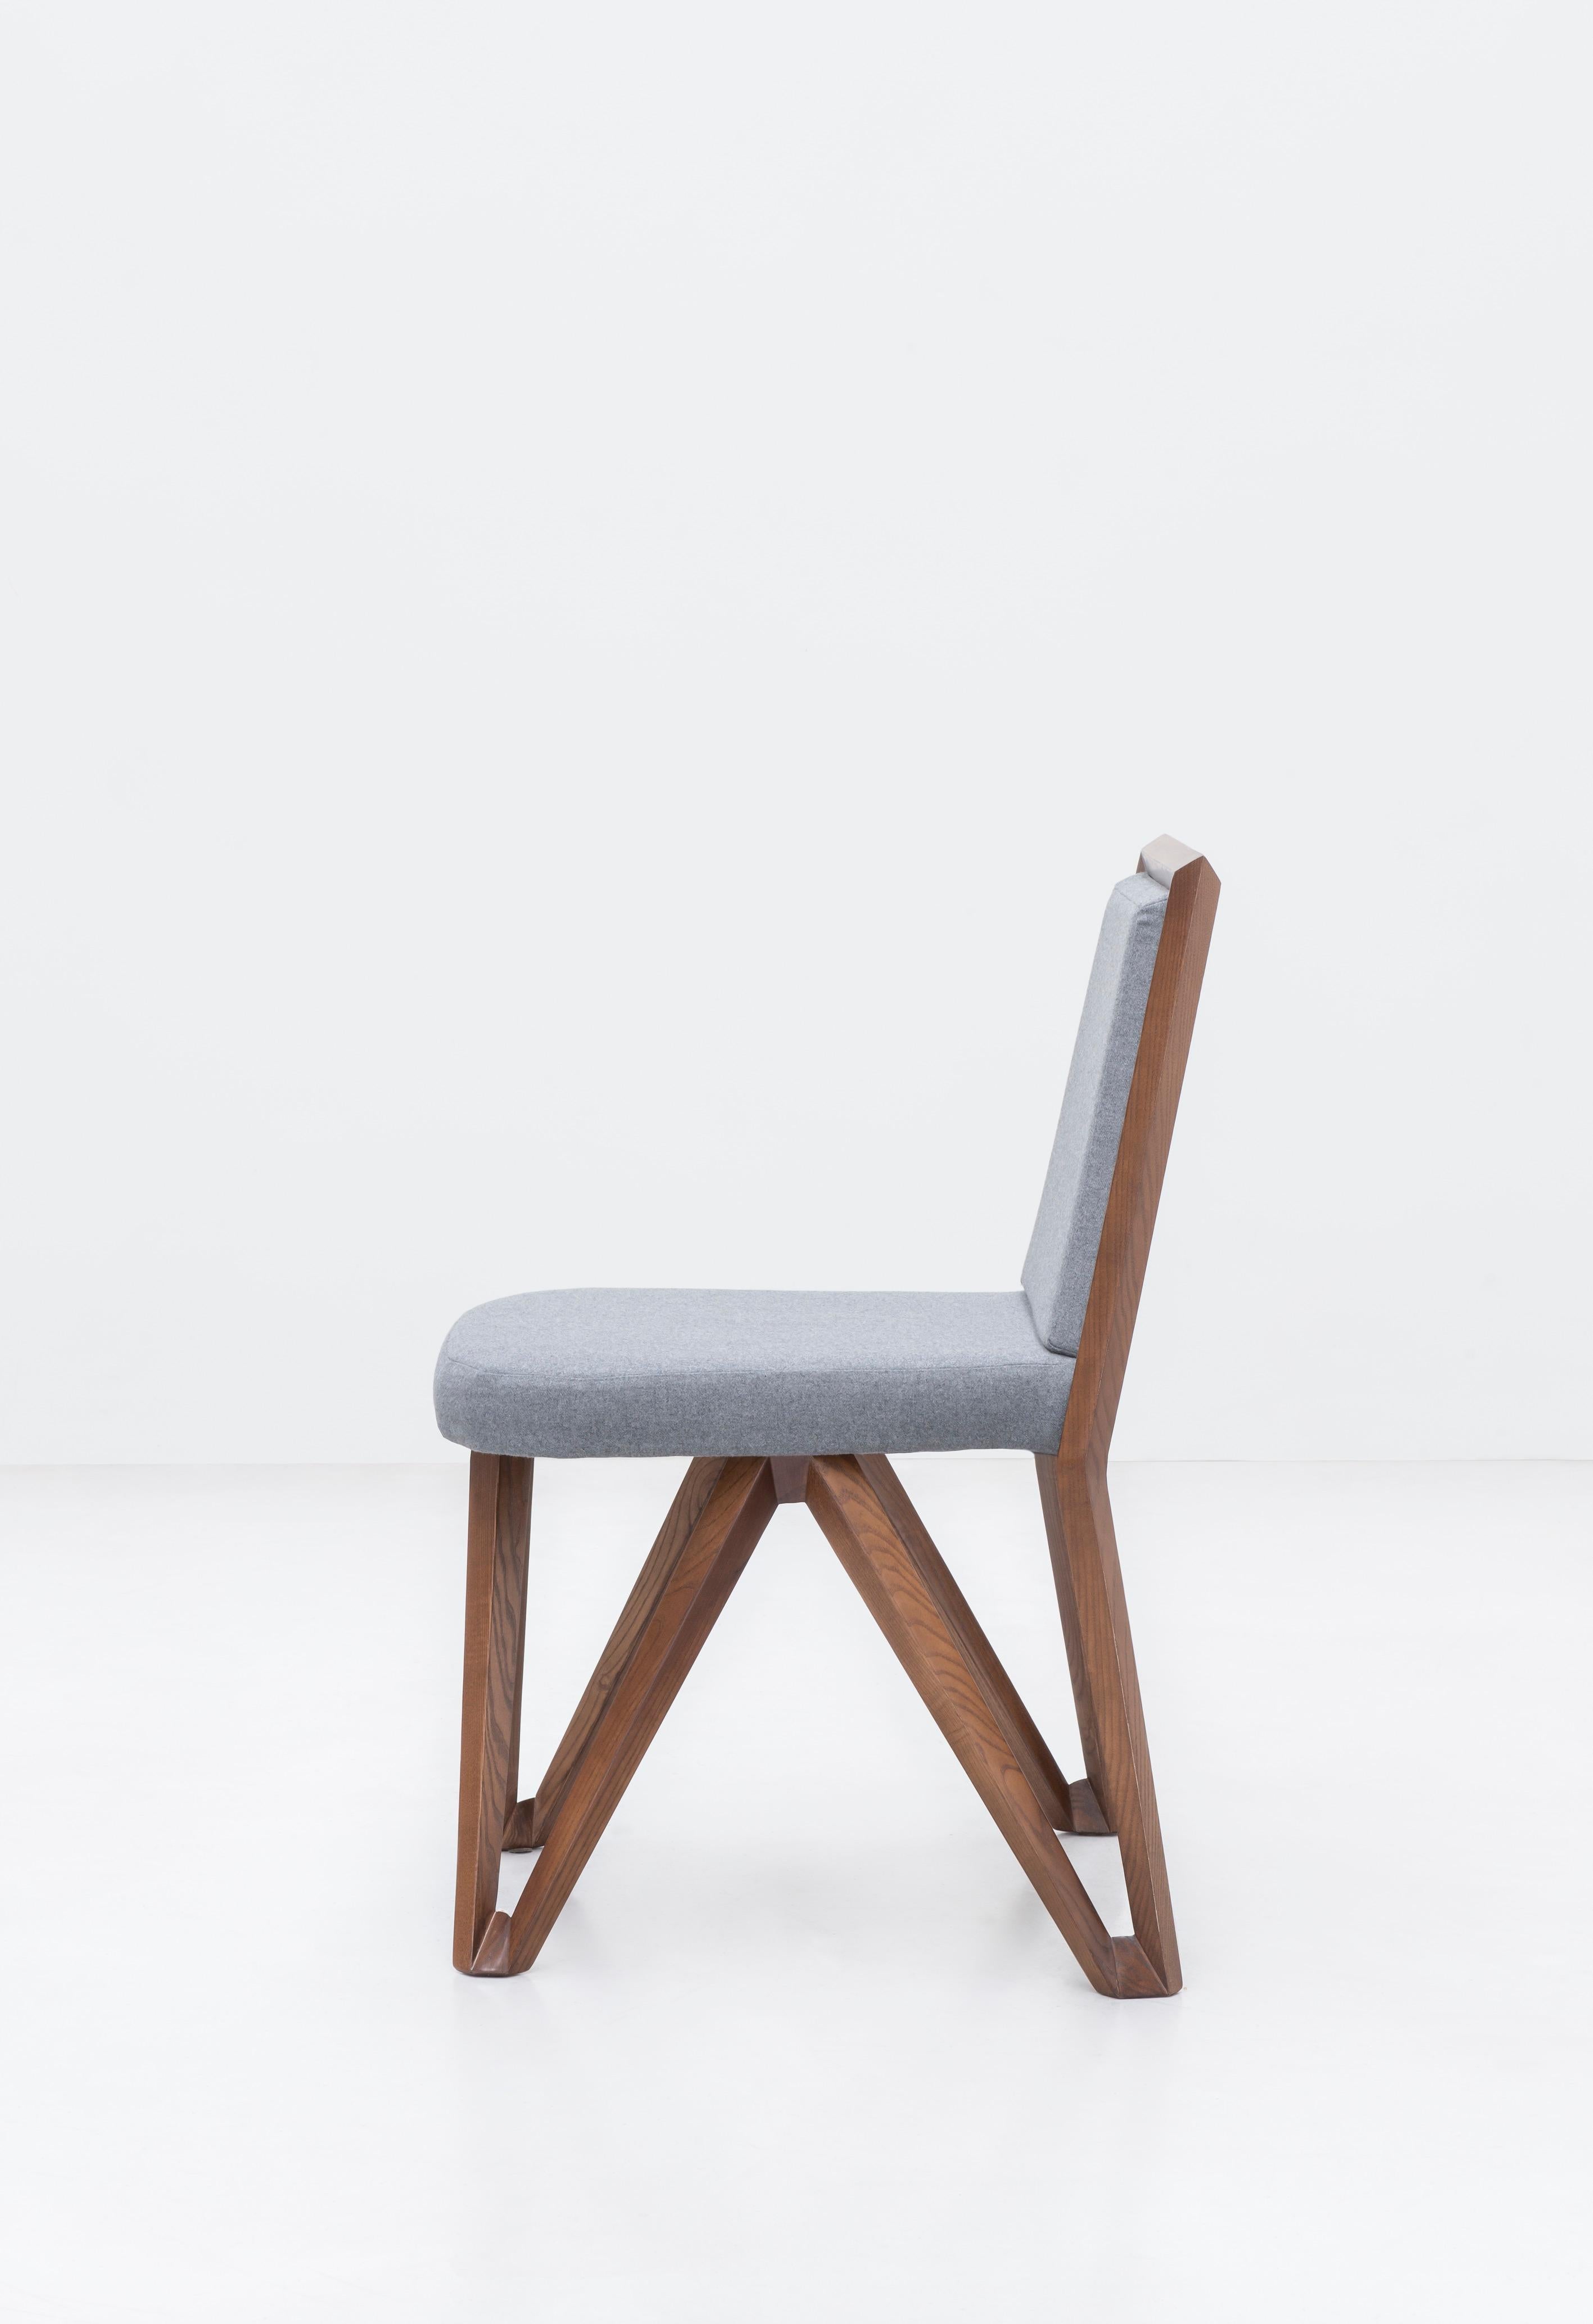 Hand-Crafted Oktopussy Side Chair by Jean Louis Deniot for Marc de Berny For Sale